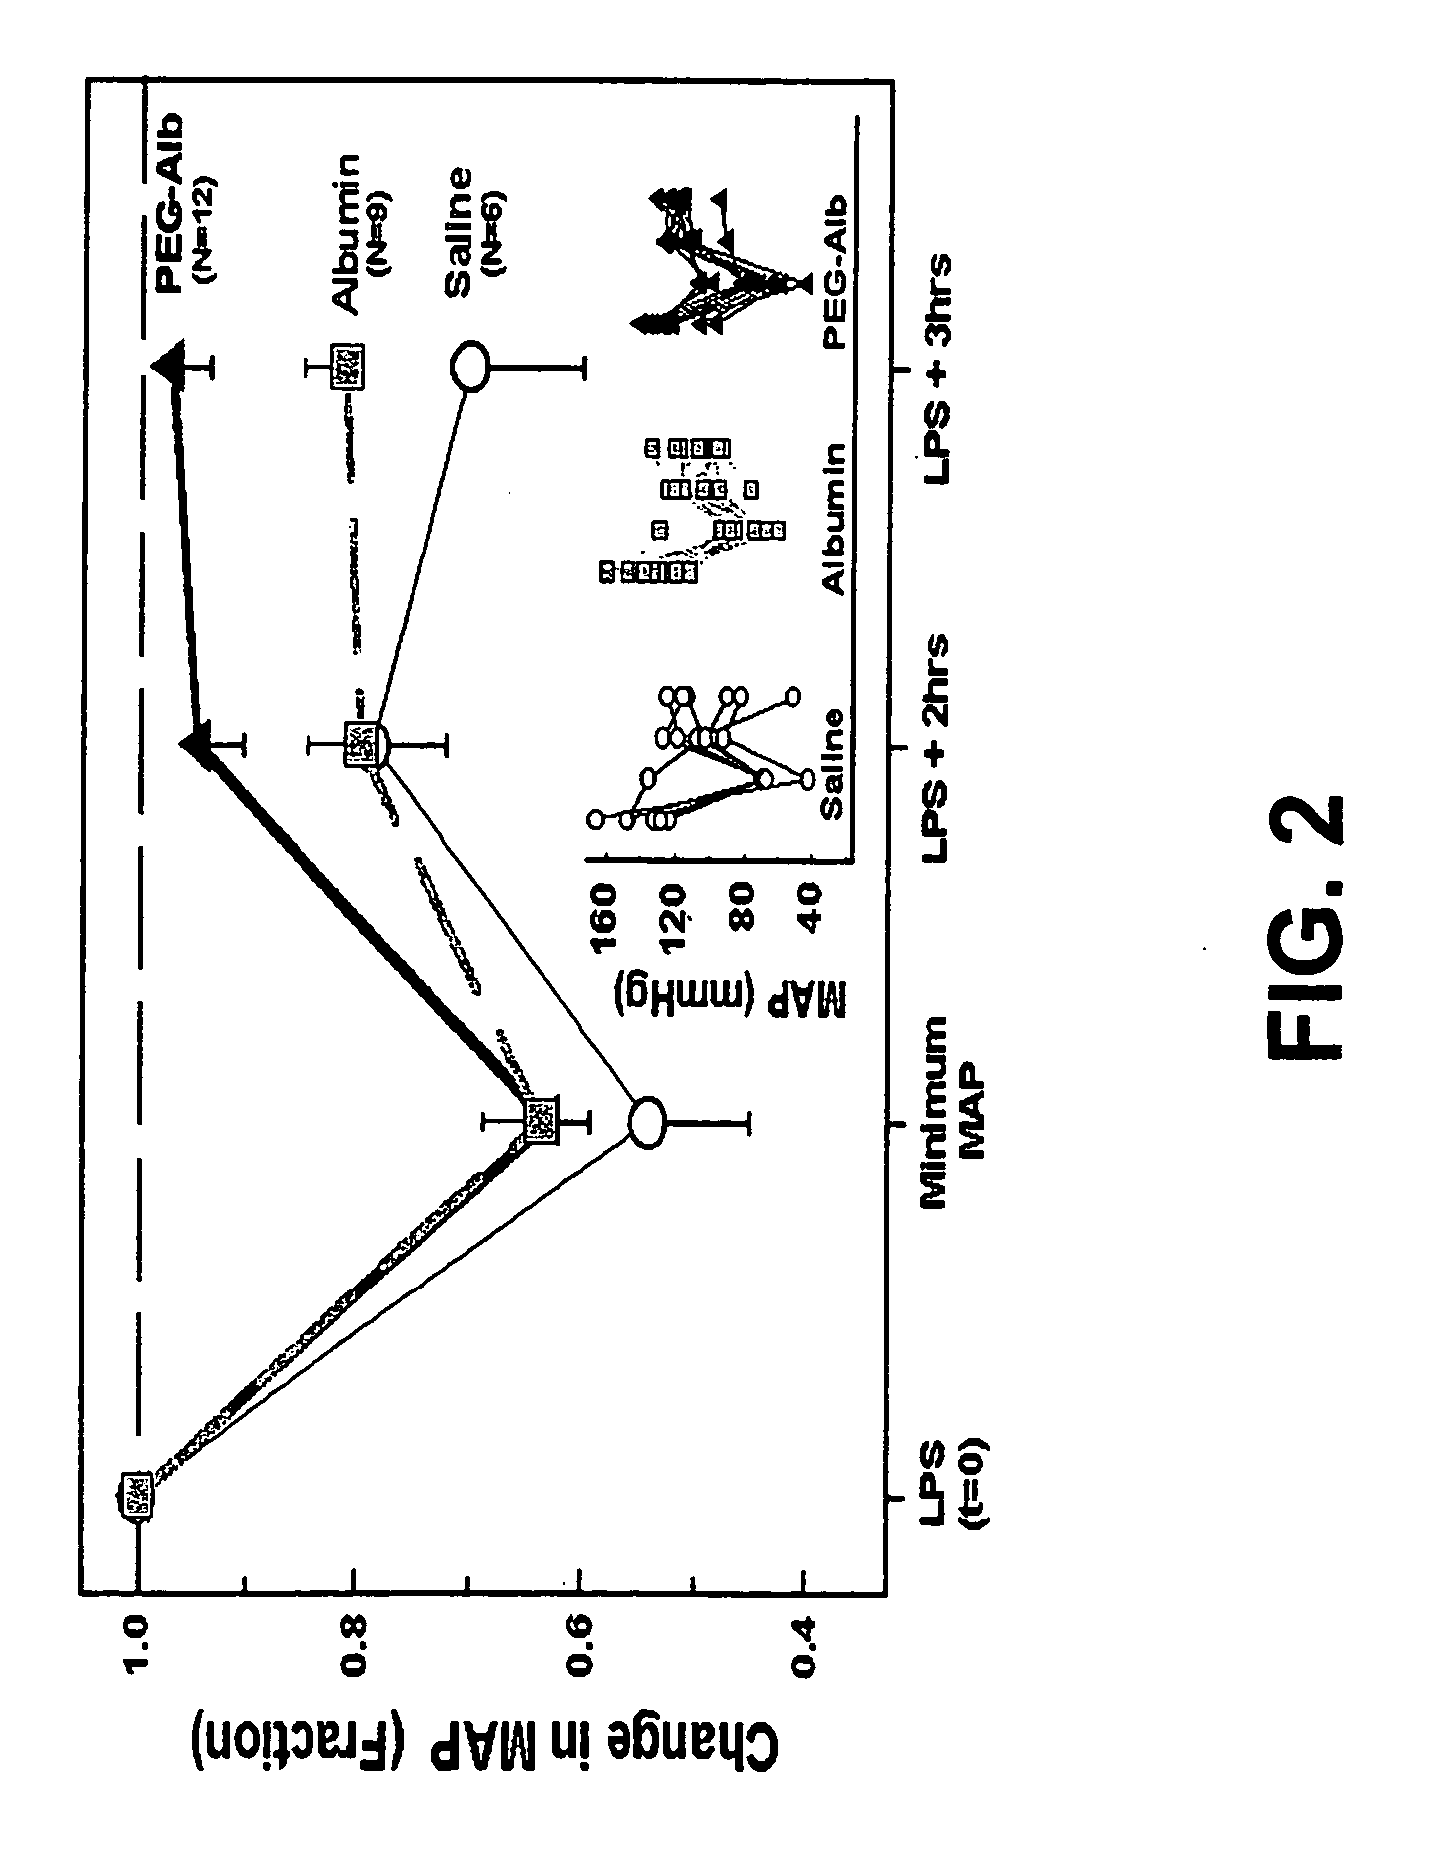 Albumin-based colloid composition having at least one protected thiol region, methods of making, and methods of use